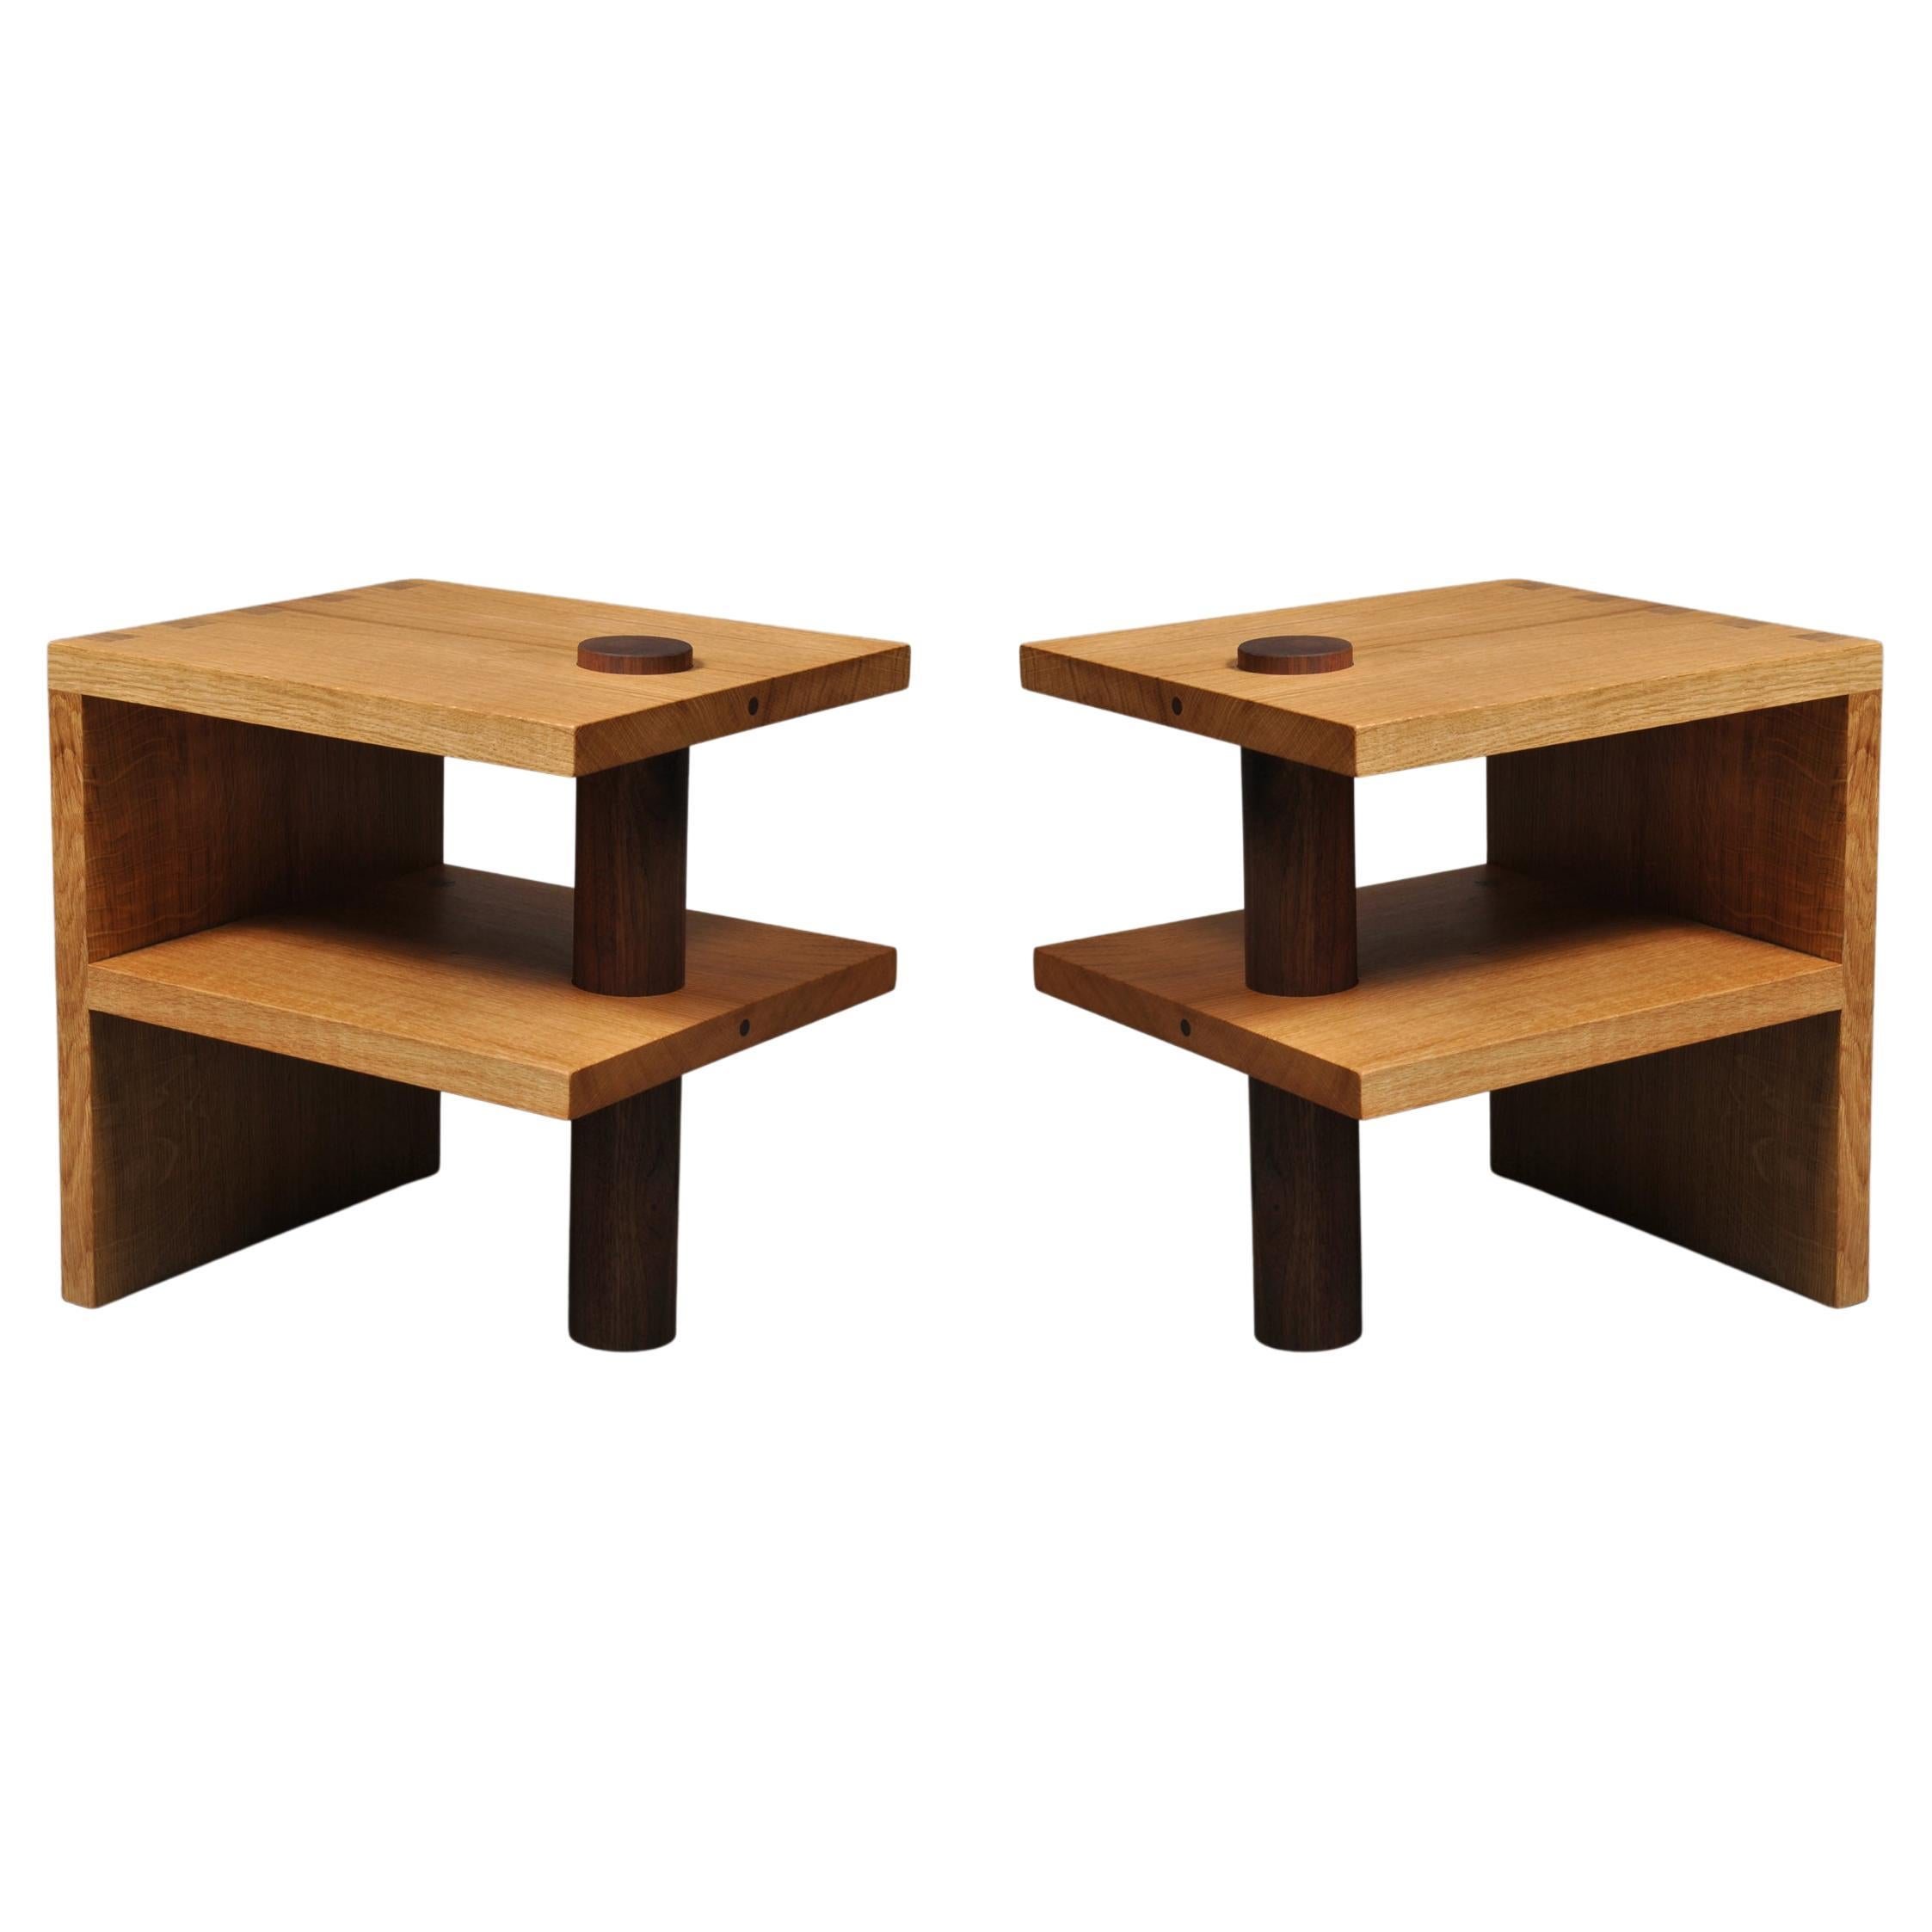 Pair of Handcrafted Oak & Walnut Tables